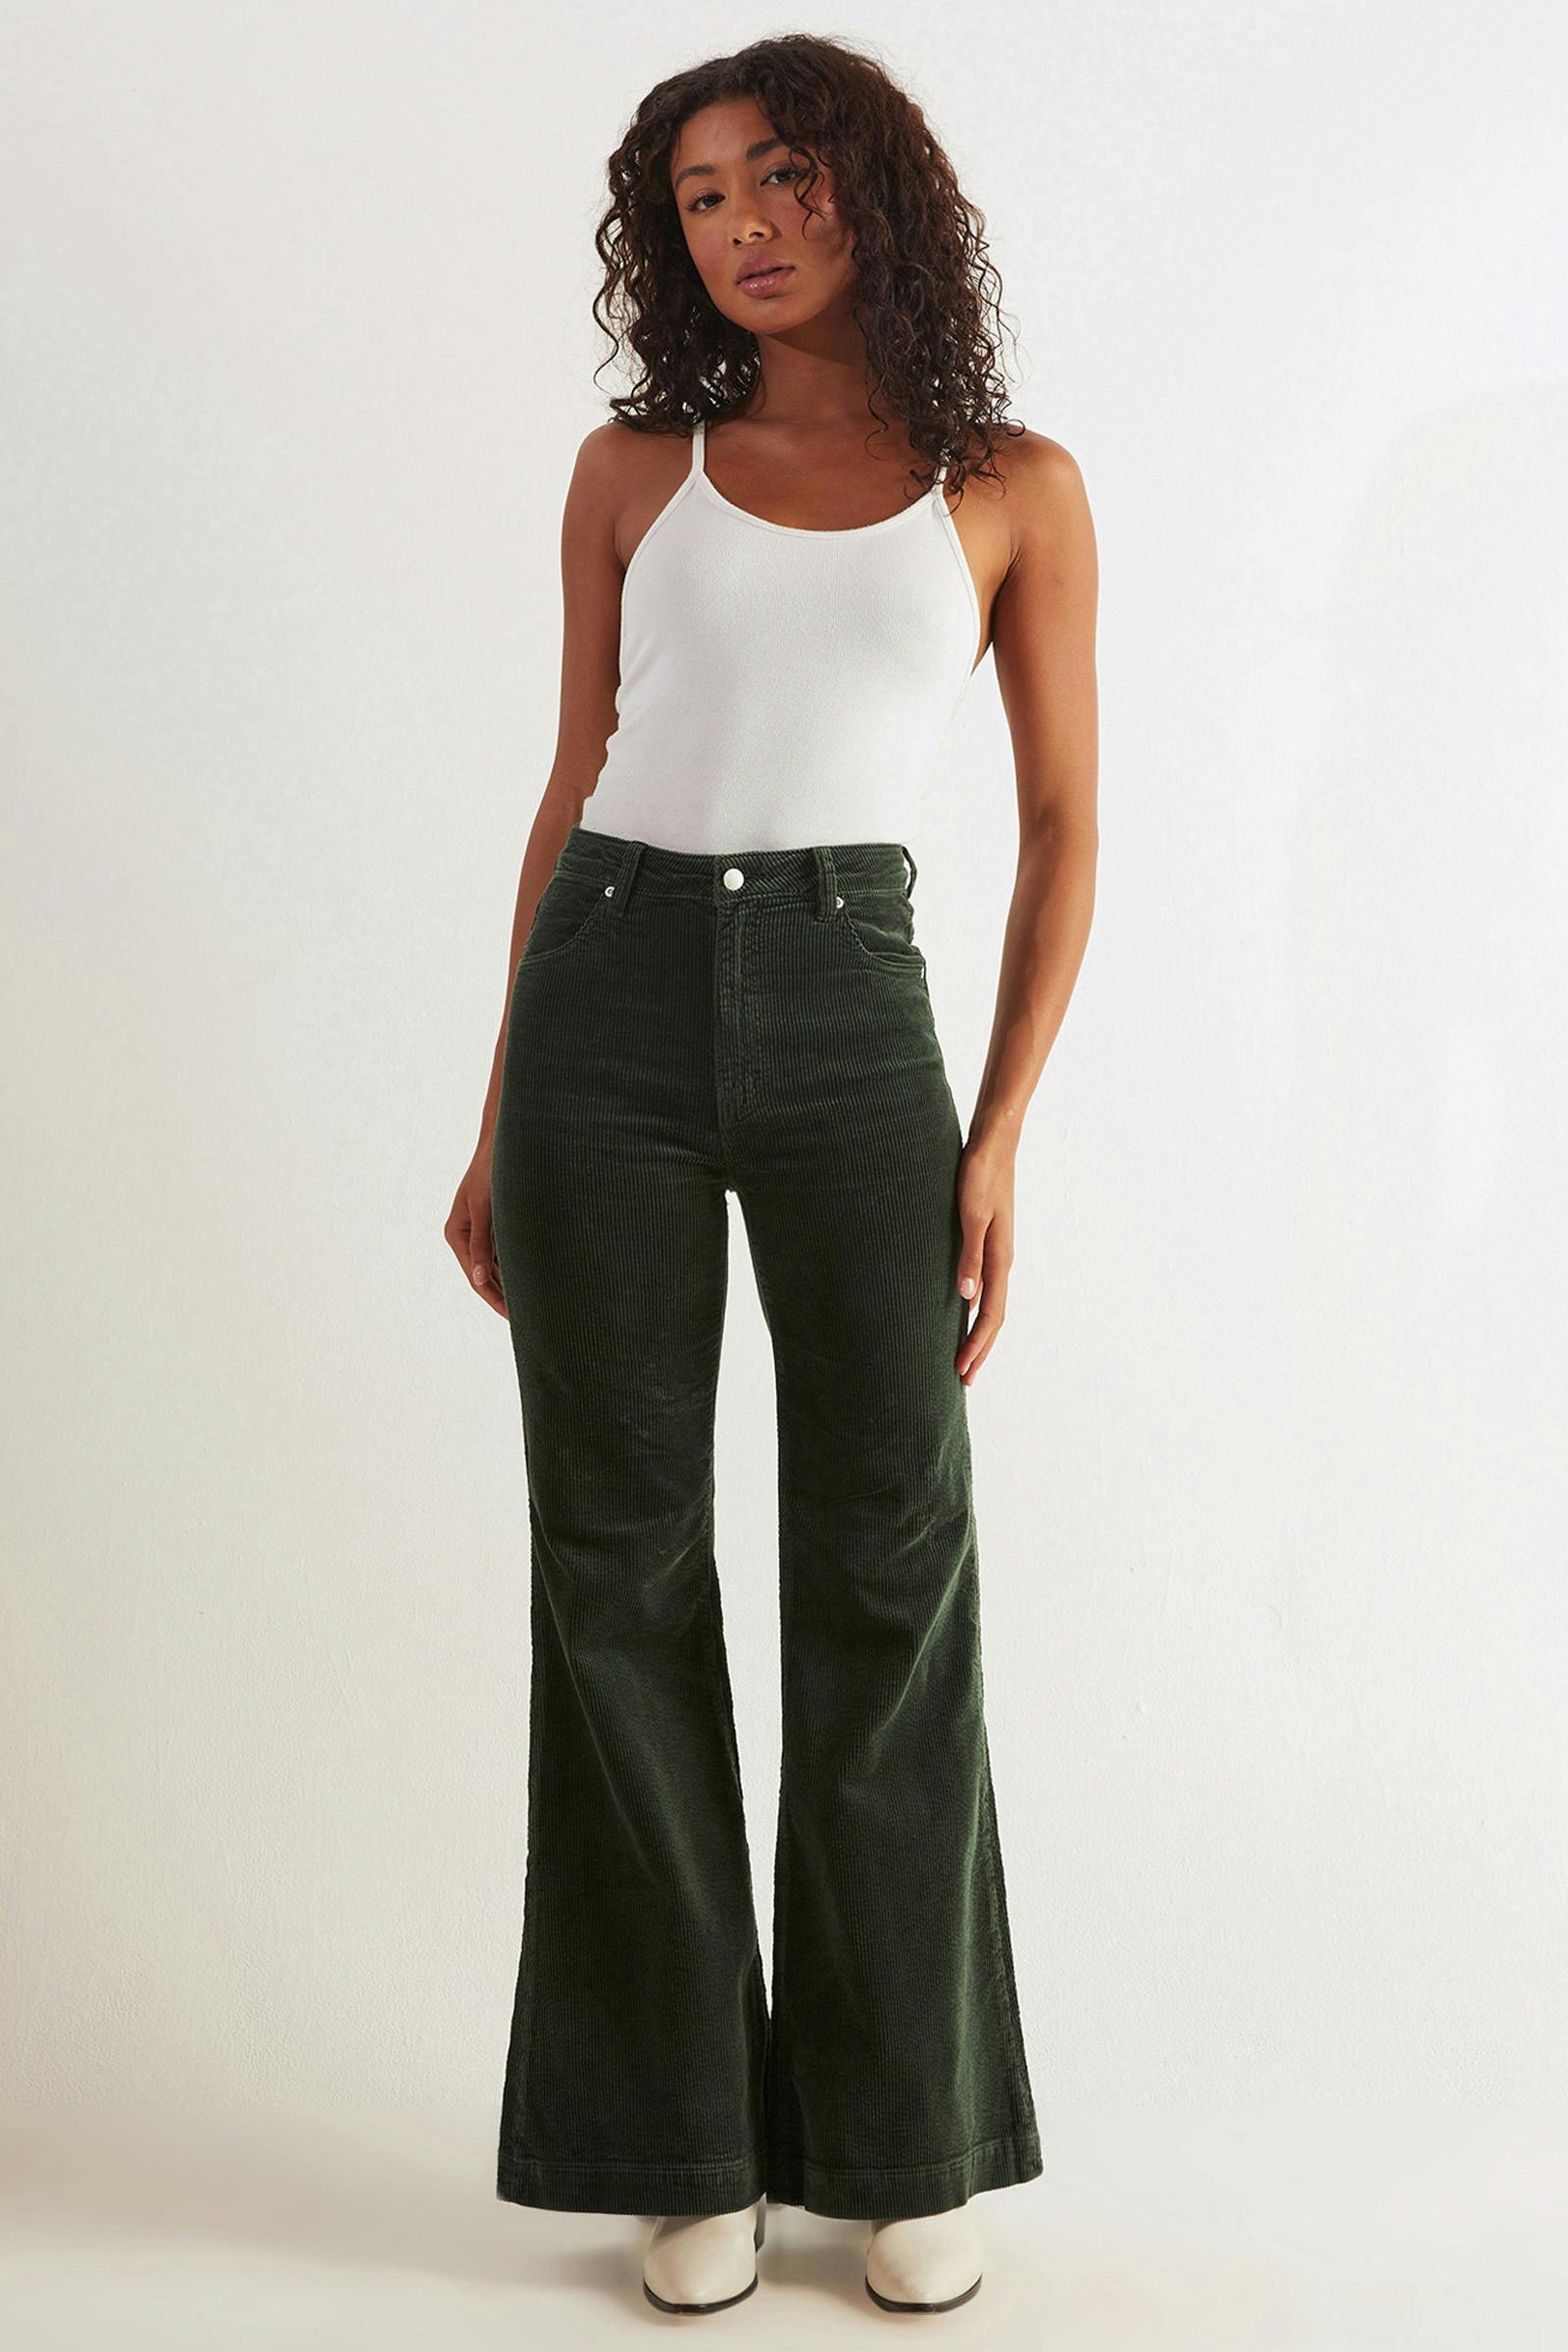 Buy Eastcoast Flare - Ivy Cord Online | Rollas Jeans